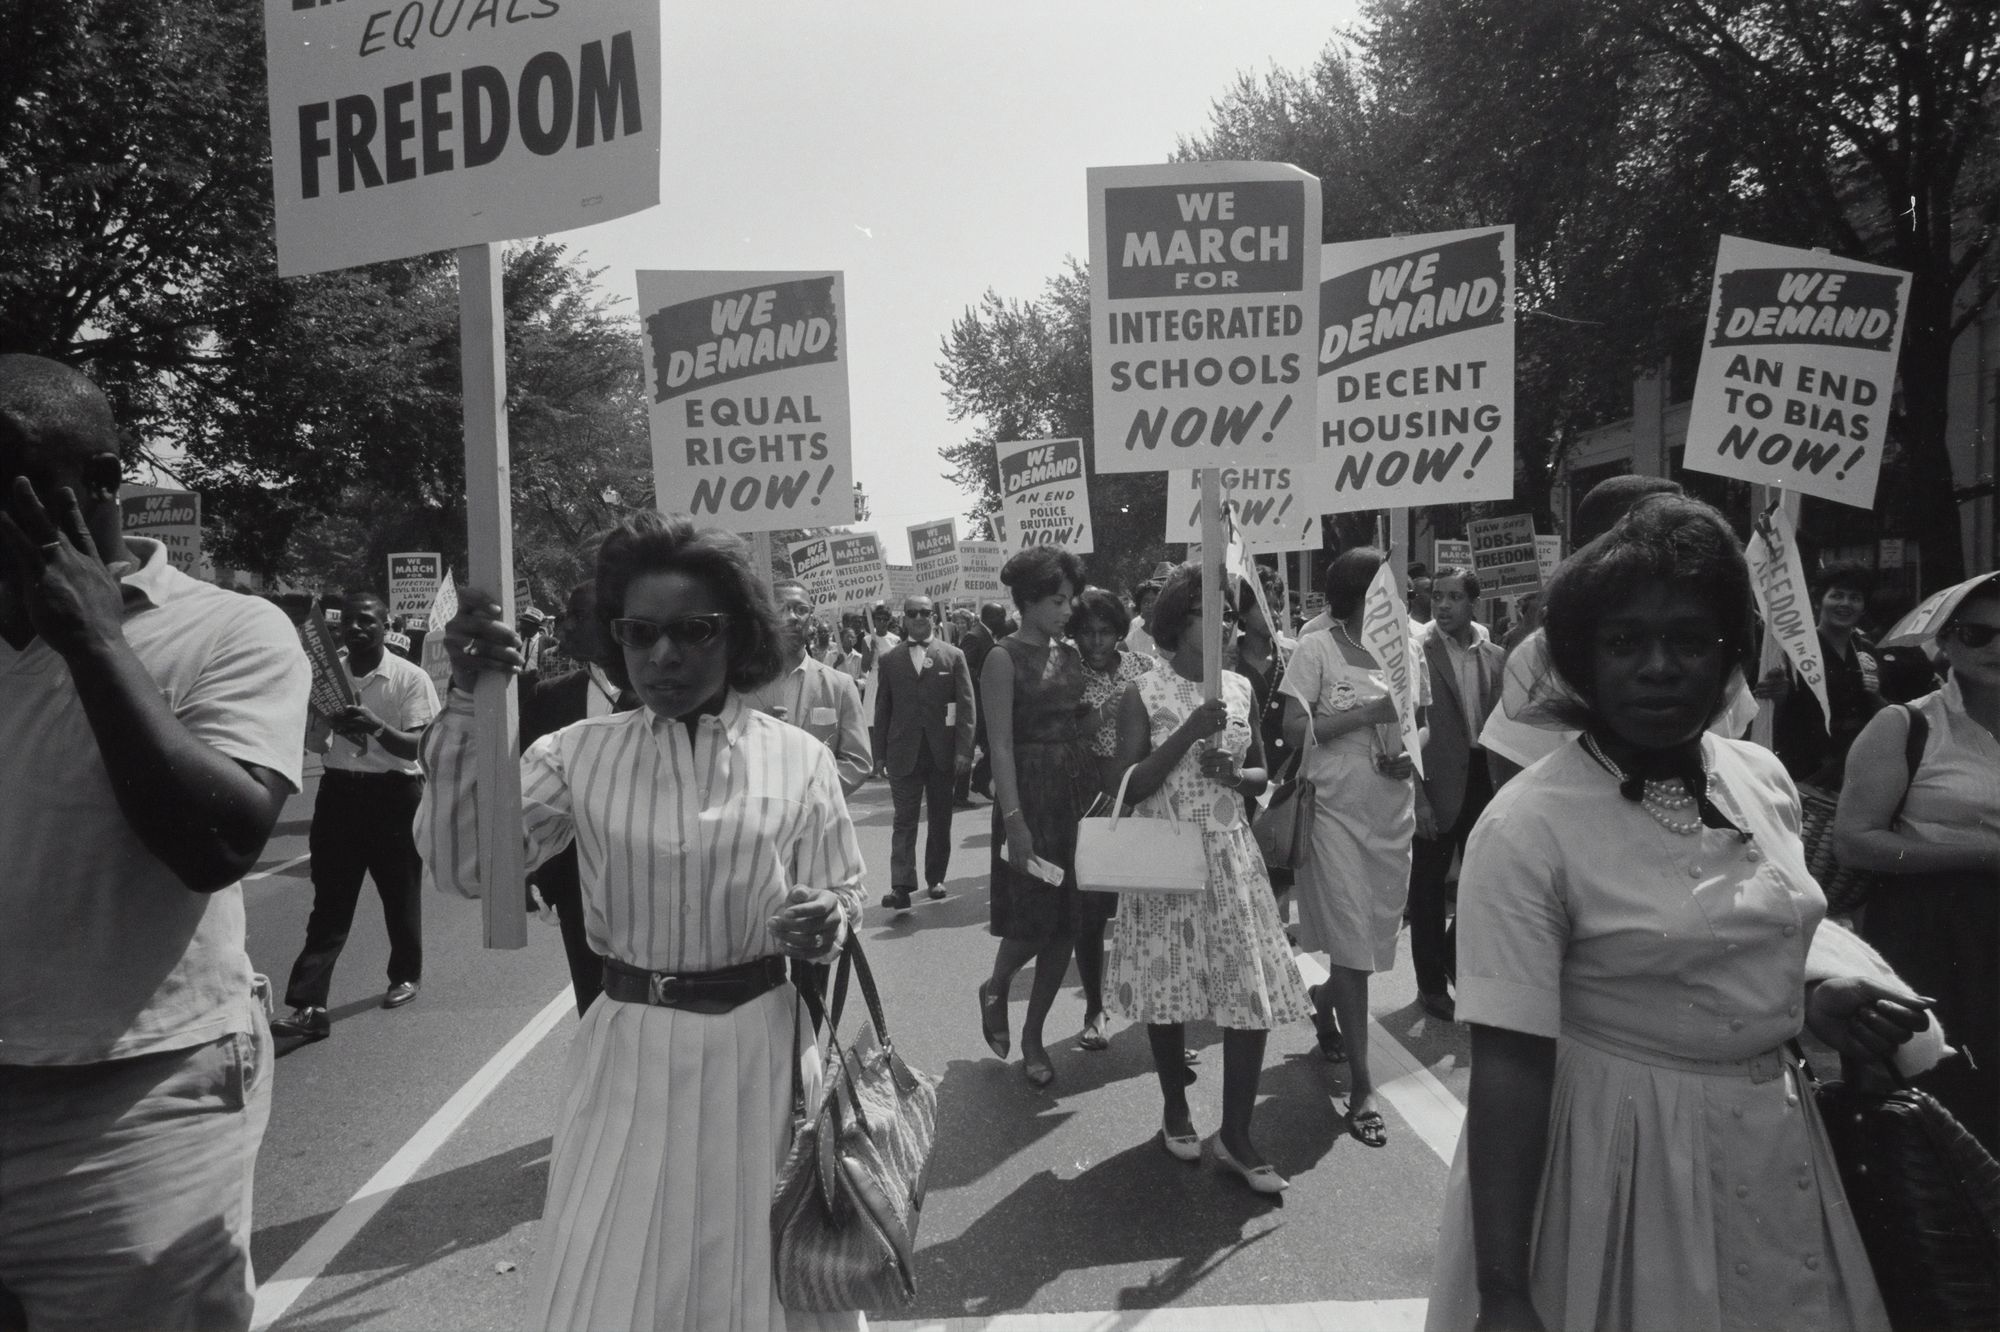 Women’s History Month: Fighters for Rights